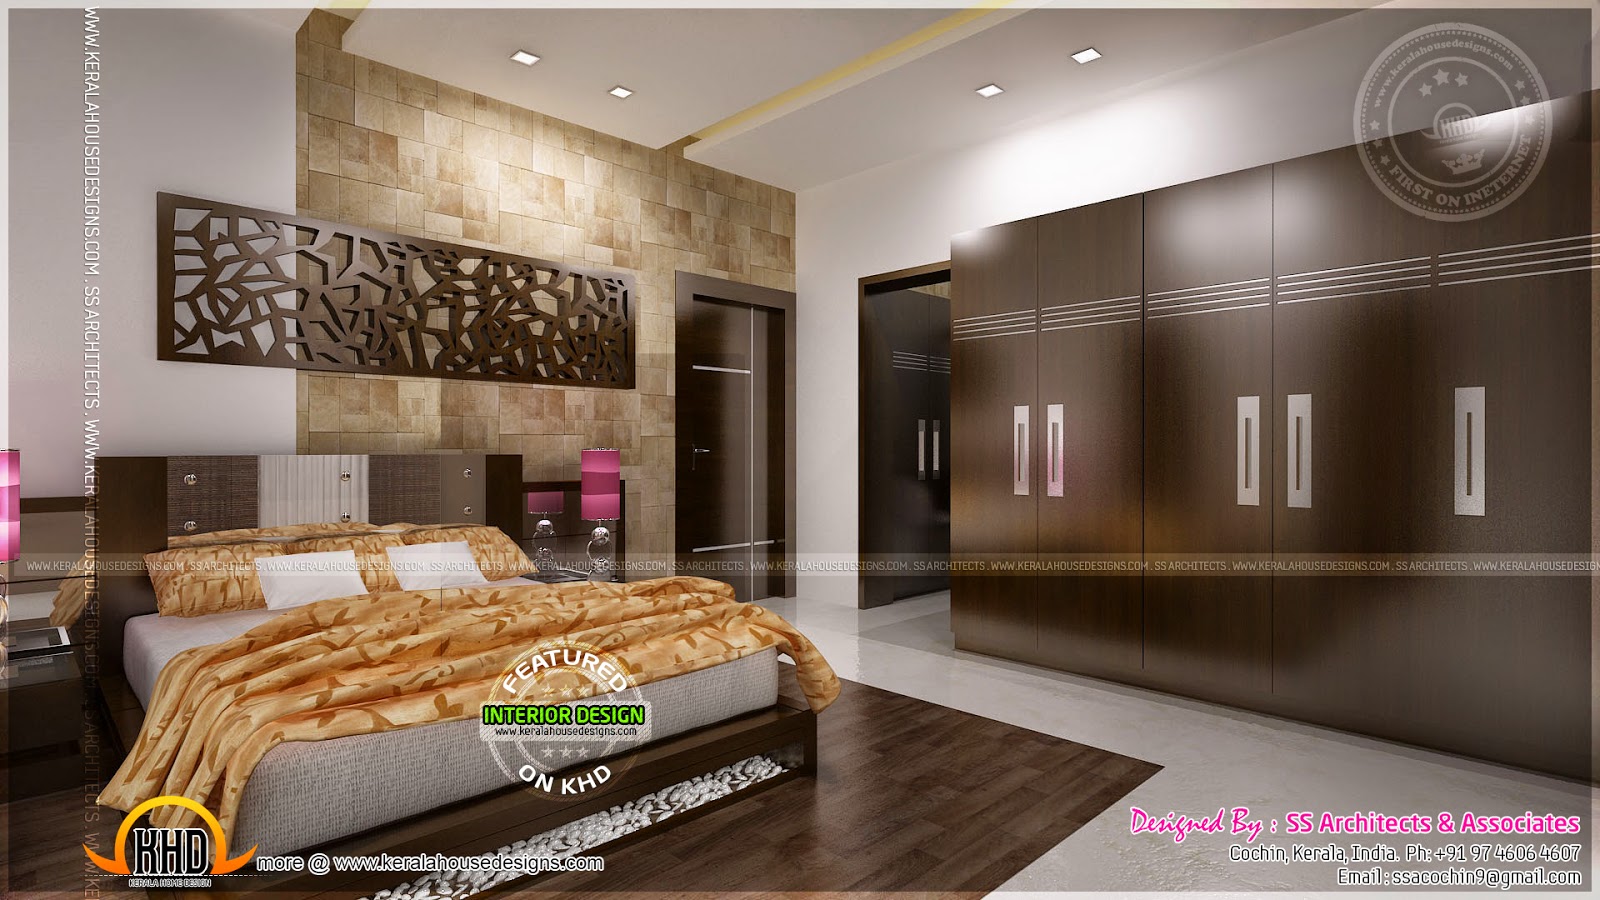 Charming awesome master bedrooms Awesome Master Bedroom Interior Kerala Home Design And Floor Plans 8000 Houses